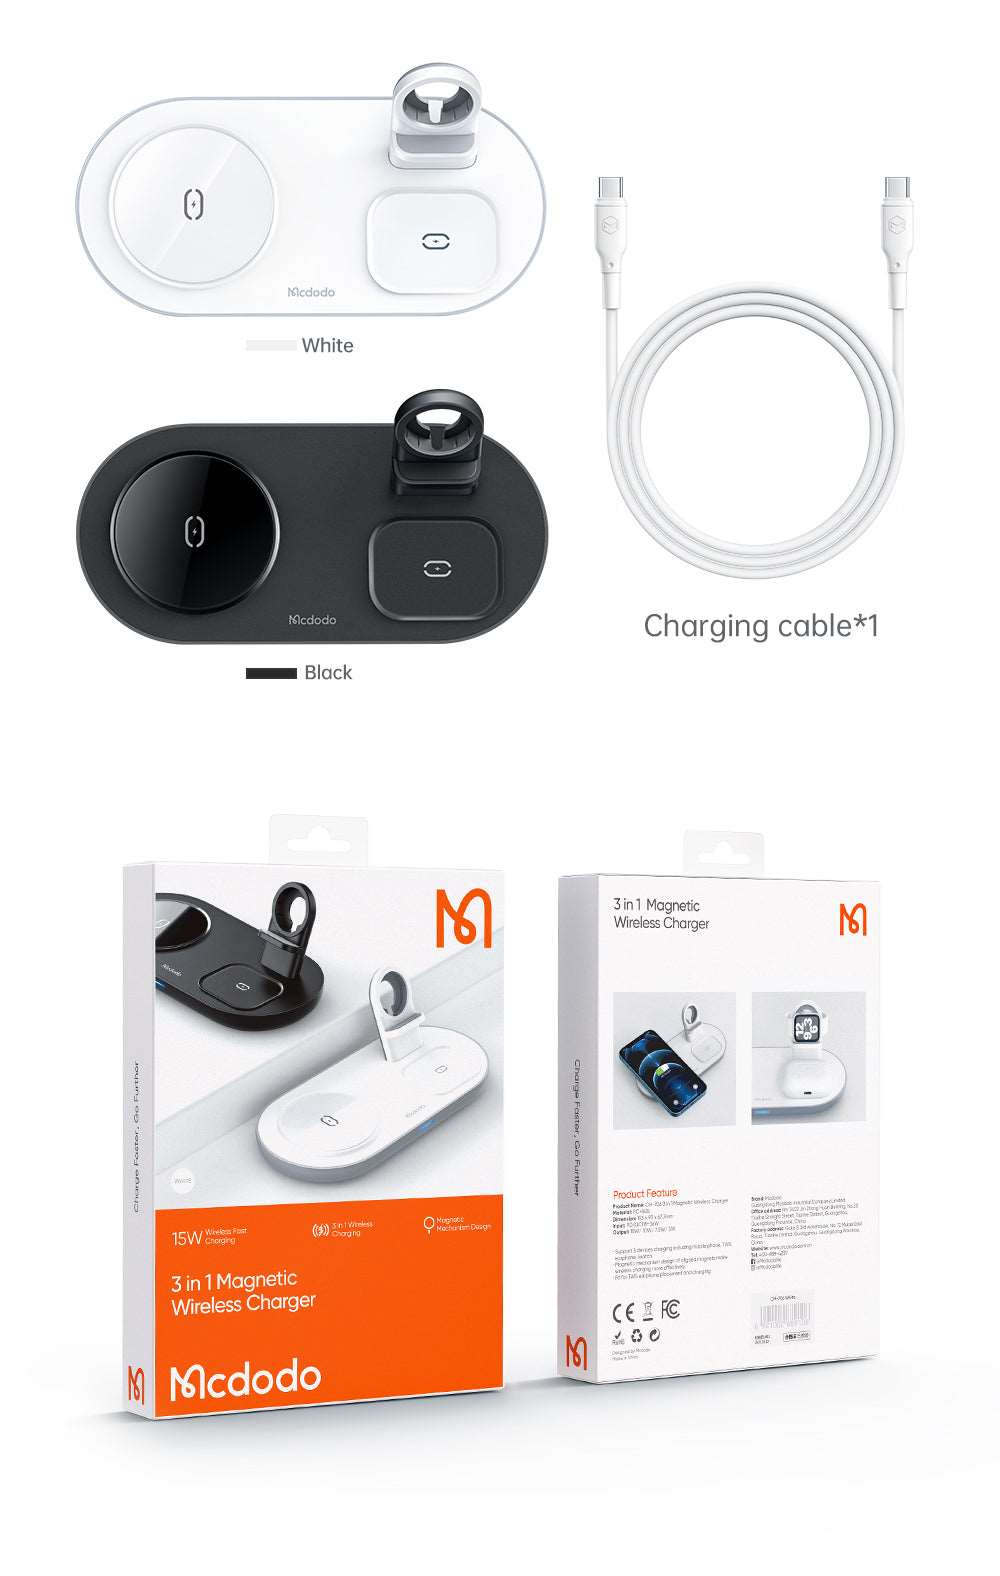 Mcdodo CH-706 | 15W Magnetic Wireless Charger | 3-in-1 Desktop Charger Mobile Cable Store